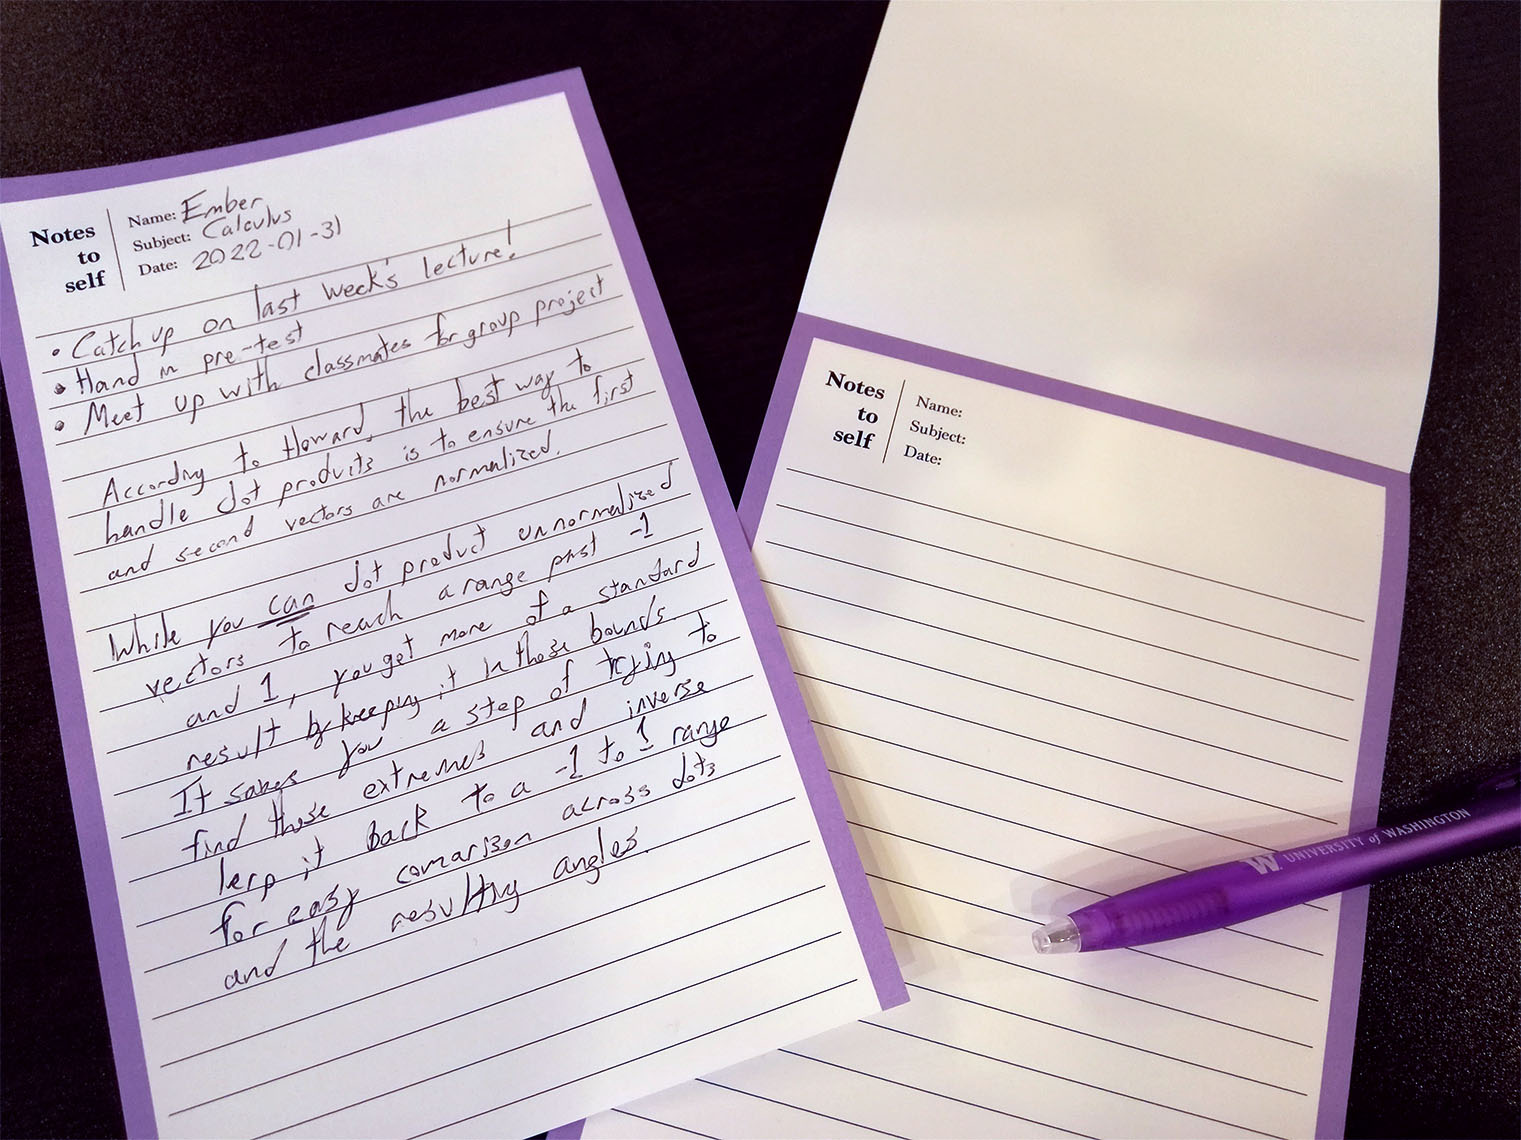 A medium-sized notepad with a pen and a separate page resting on top. Many illegible notes are taken on the separate page.